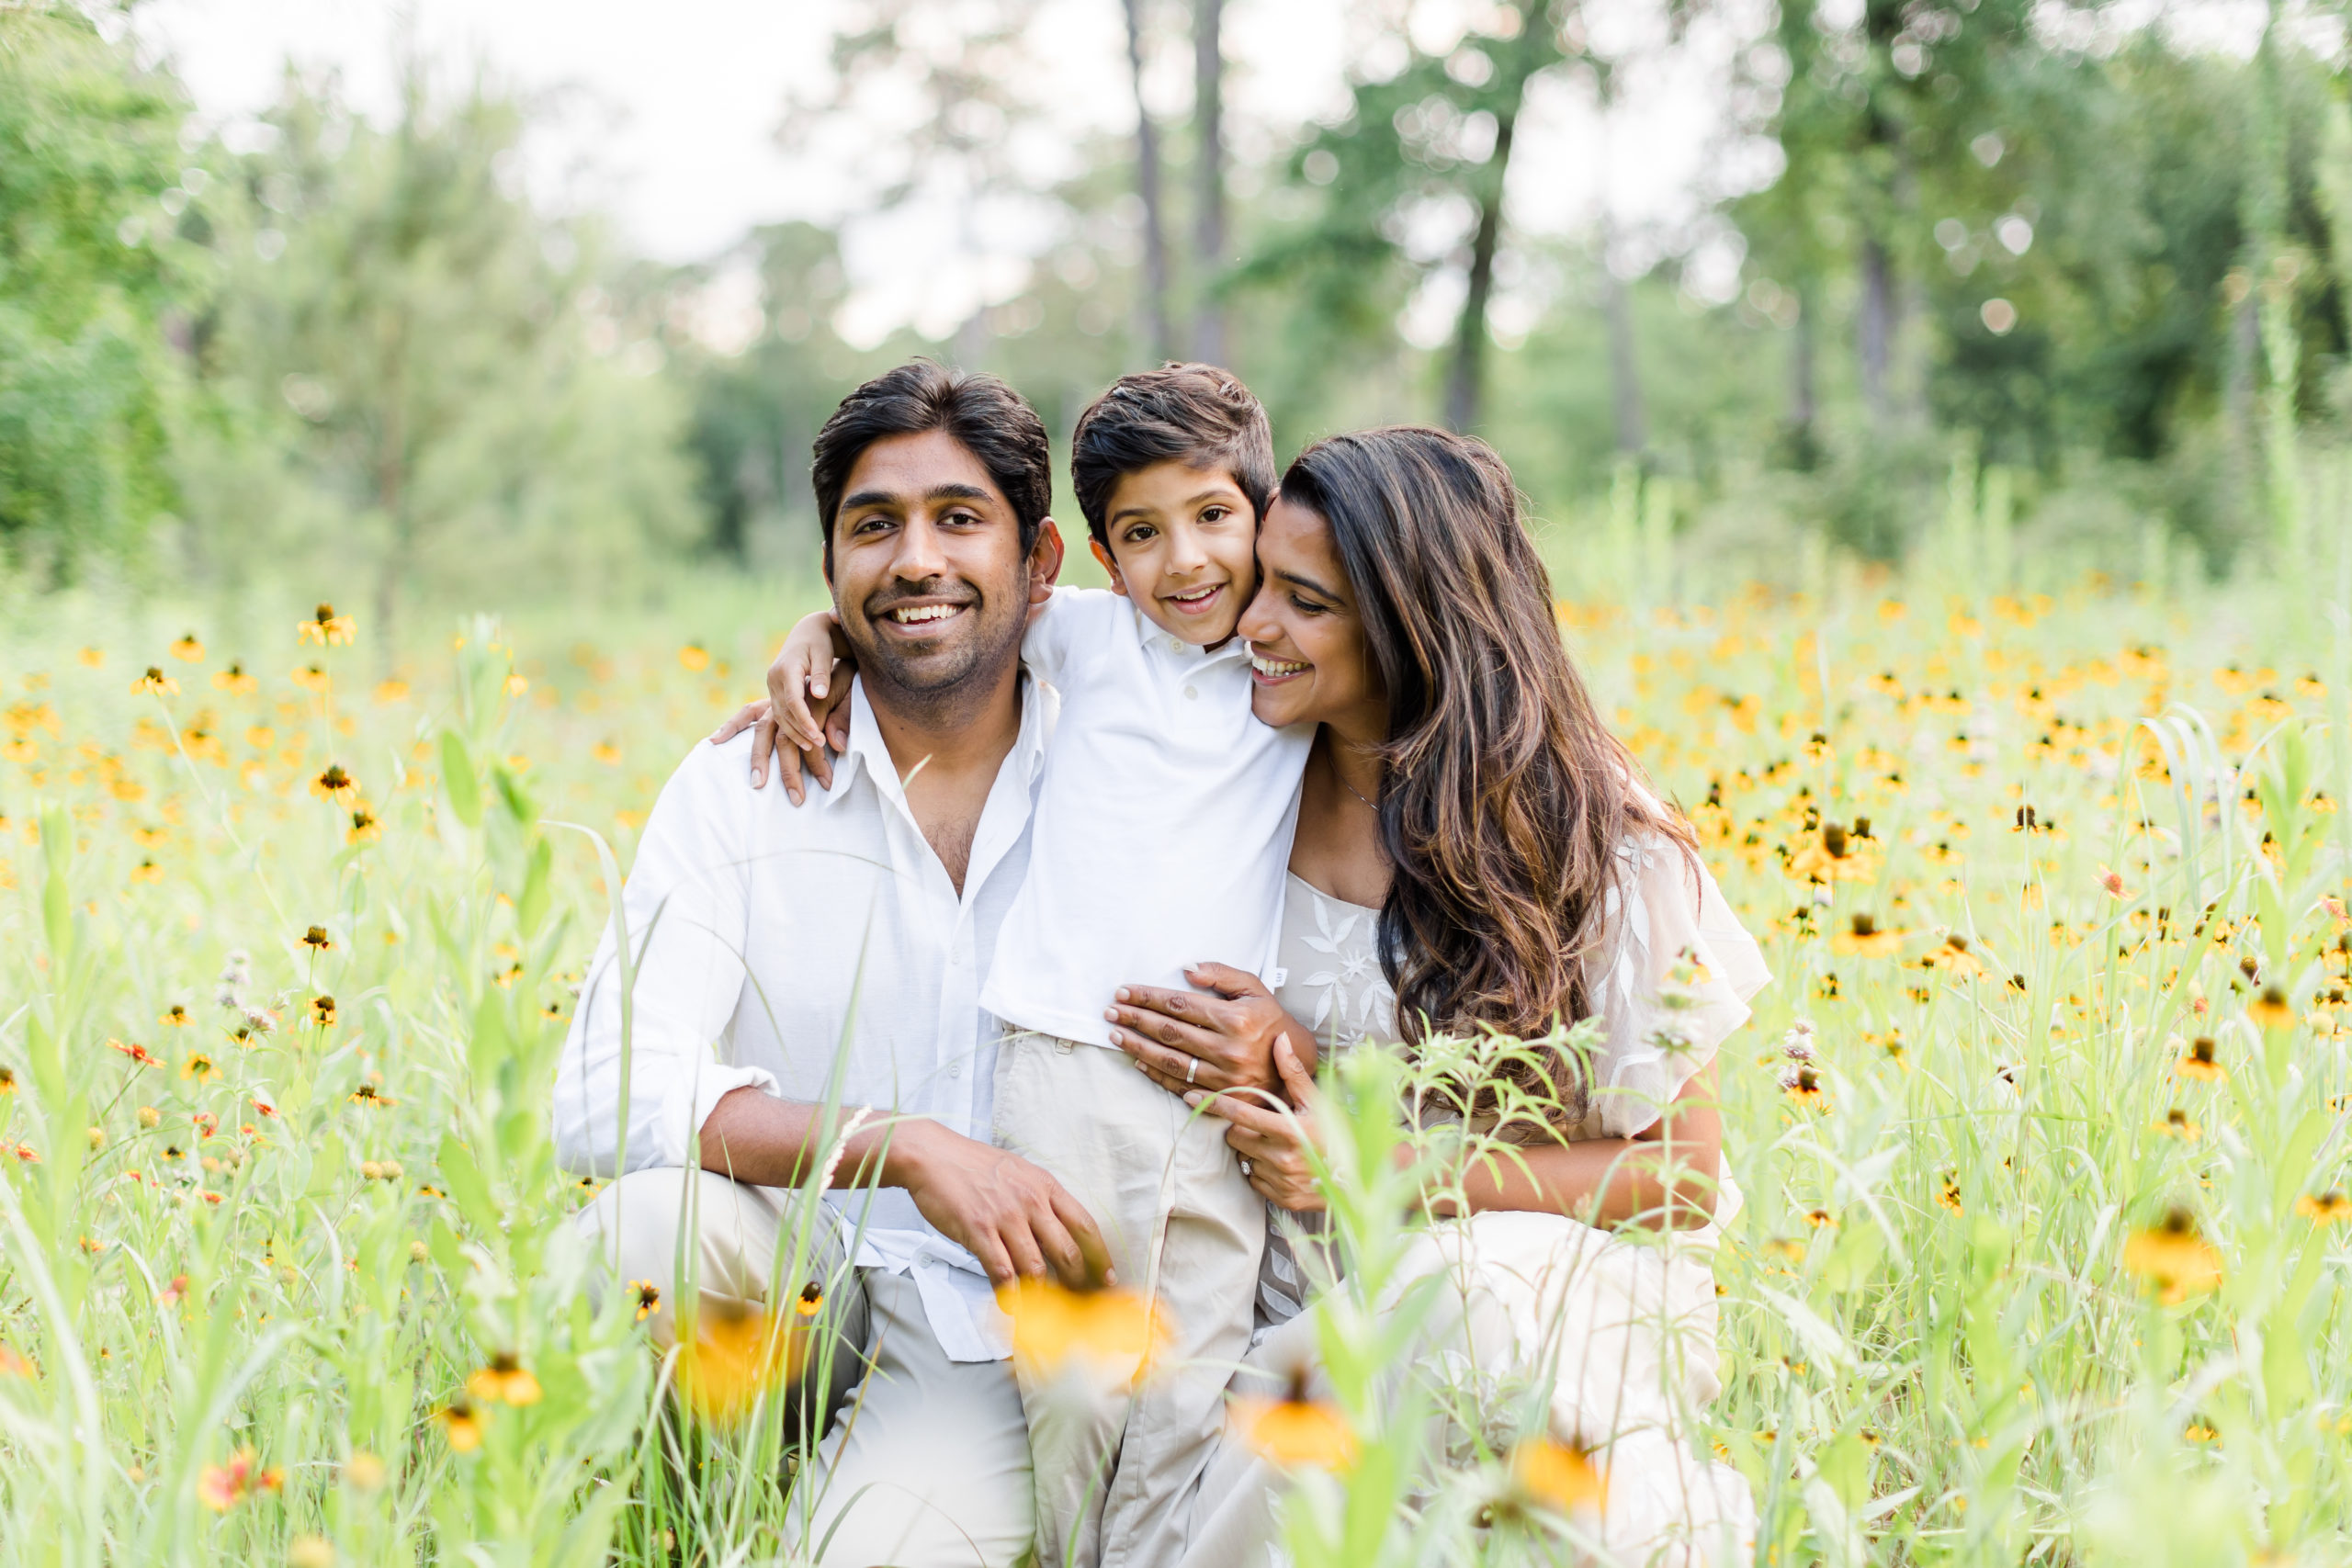 Crouched down in a field of yellow wildflowers, Houston, Texas's Monette Anne Photography captures this family of three huddled together and smiling during their family photos. houston texas wildflower sunflower photo session cream and white family photo colors houston texas family photographer #HoustonArboretumandNatureCenter #HoustonTexasFamilyPhotographer #HoustonTexasPhotographer #HoustonHeightsPhotographer #HoustonHeightsFamilyPhotographer #FamilyPhotoOutfitInspiration #NeutralFamilyPhotoOutfits #SummerFamilyPhotos #MonetteAnnePhotography #FamilyPhotoPoses